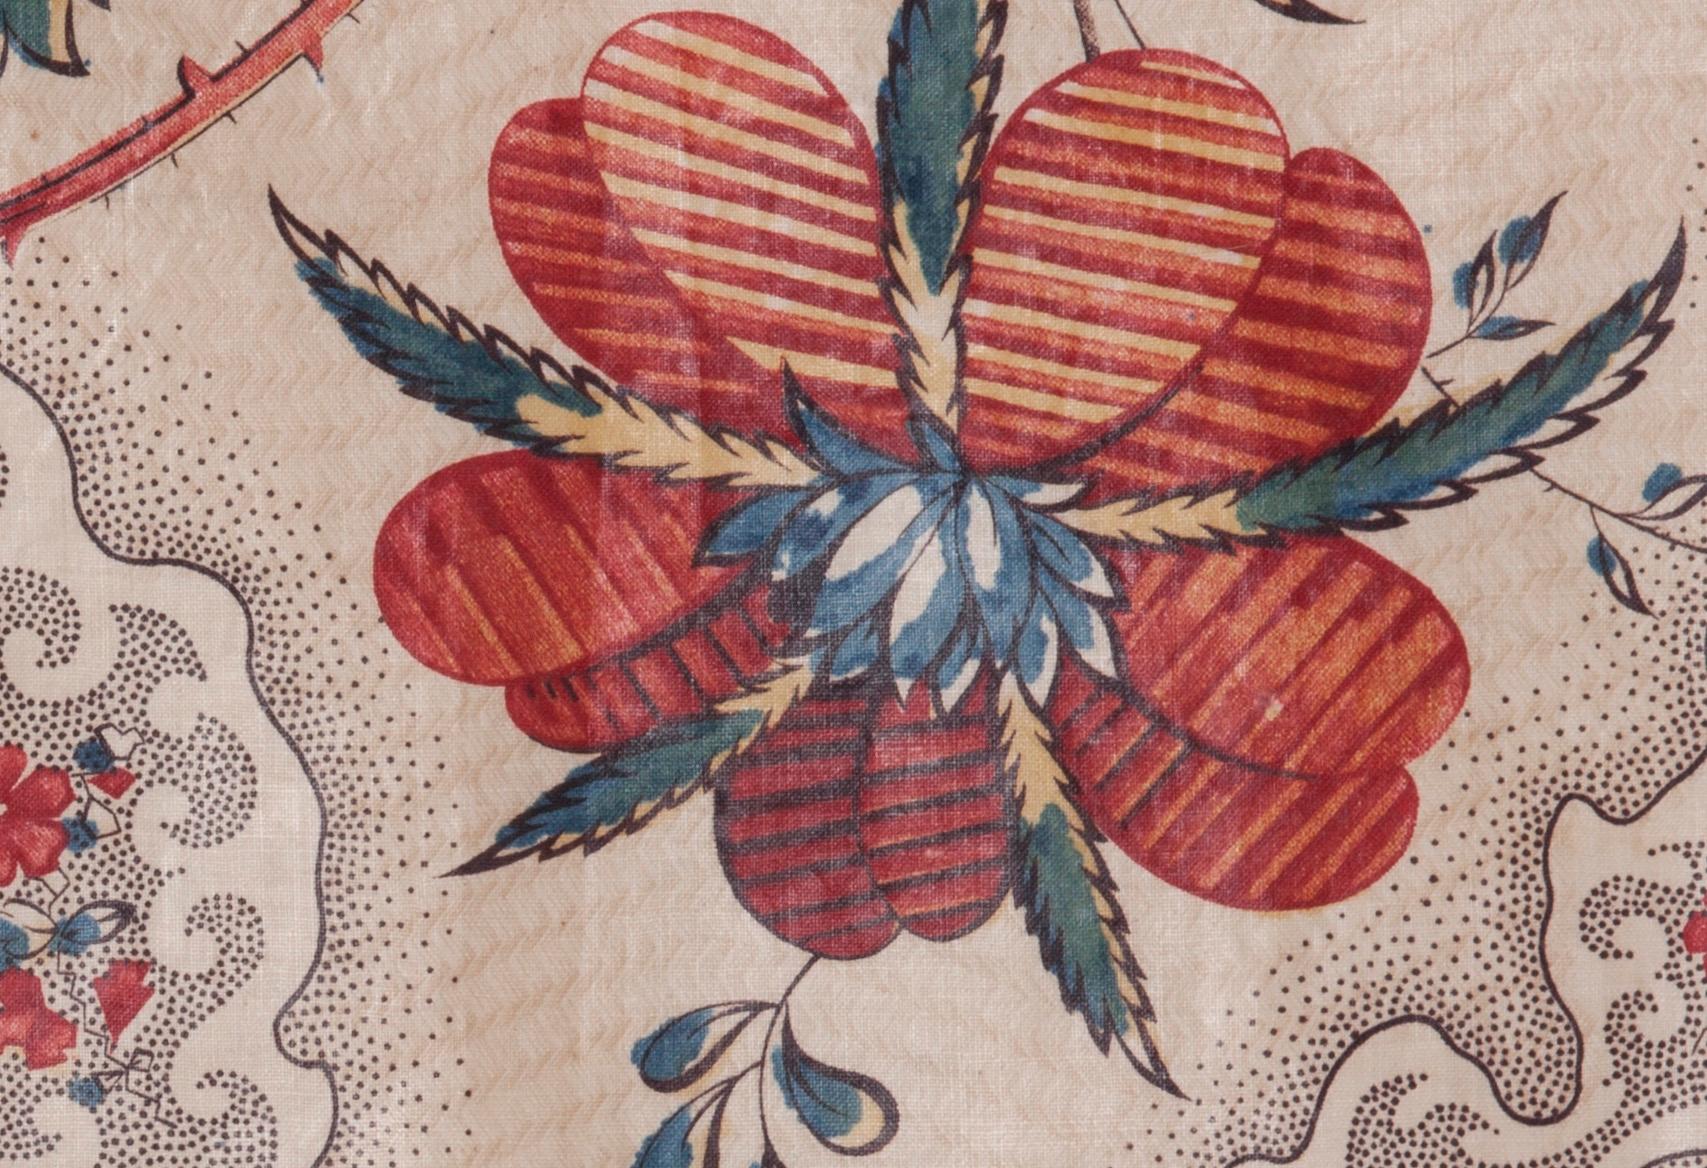 Made using natural dyes and copperplate printing, this early 19th century cotton textile fragment features elaborate florals and tiny dots on blocks for background texture, as well as a chintzed (glazed) surface. This piece is offered as a historic